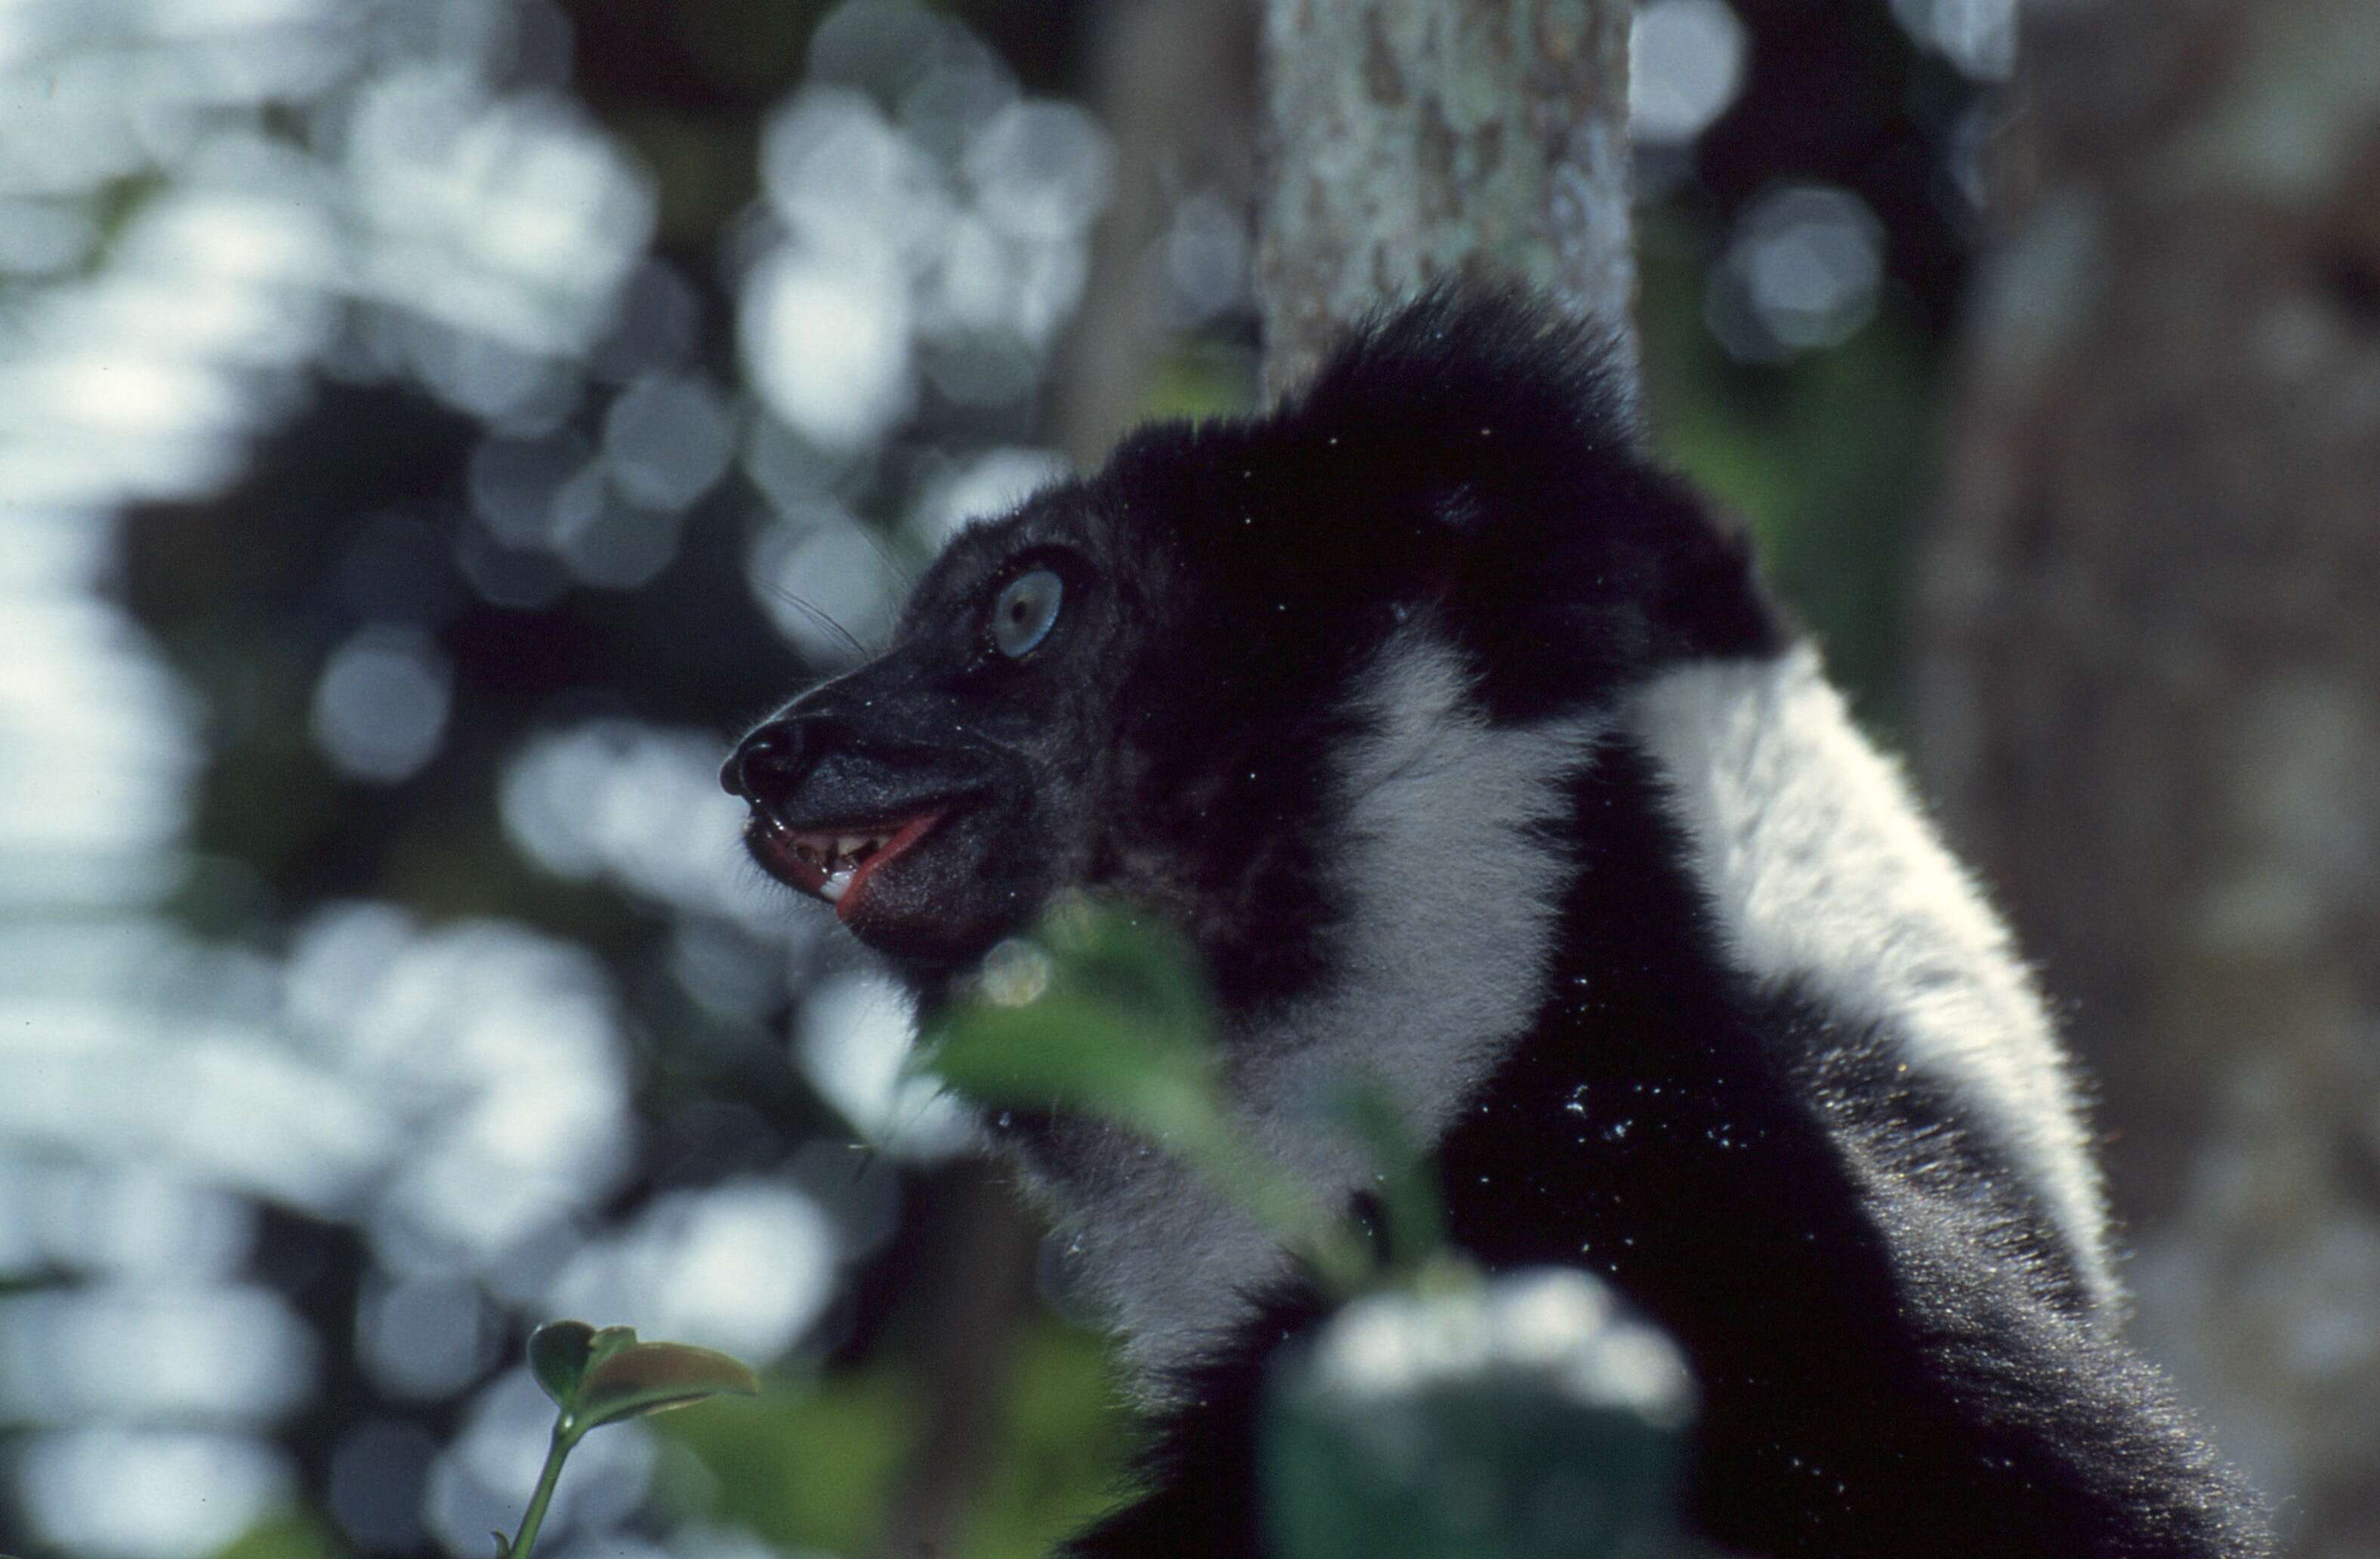 Image of indris, sifakas and woolly lemurs